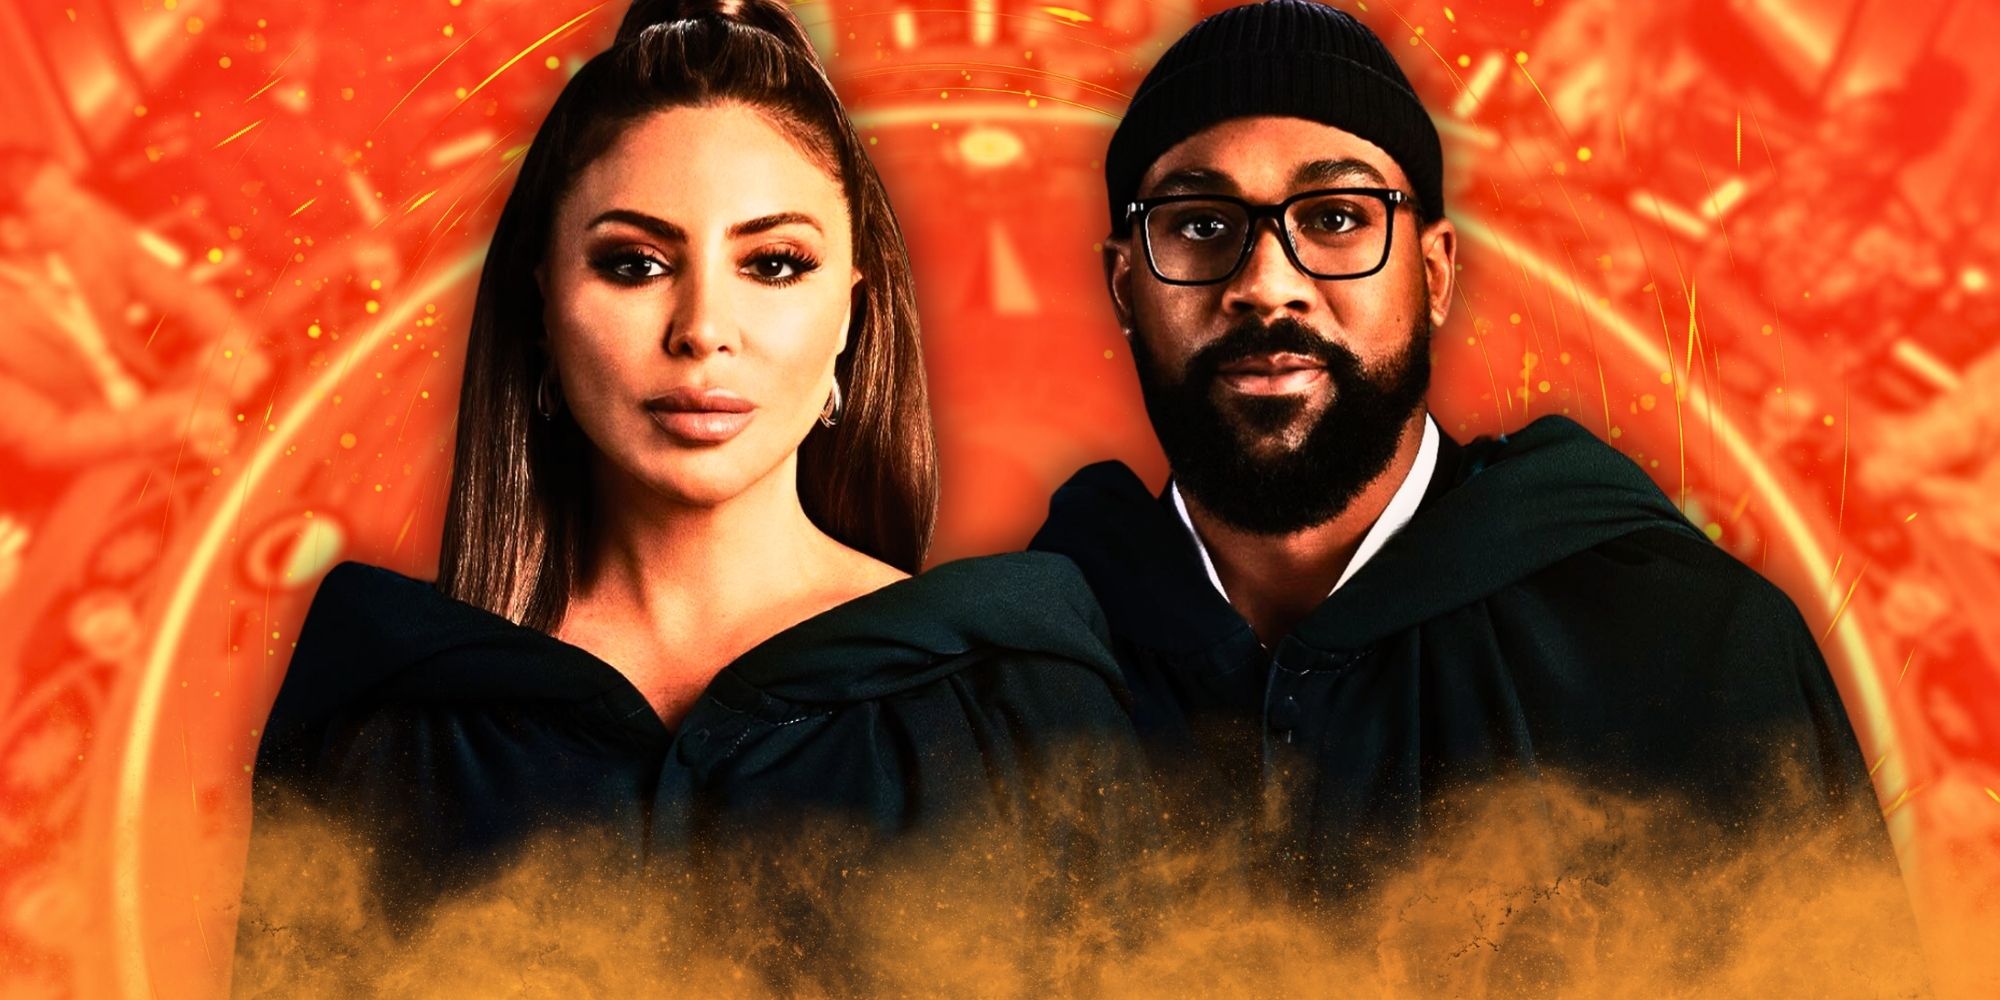 Marcus Jordan and Larsa Pippen team up for reality TV show with $250,000 in  sight: What